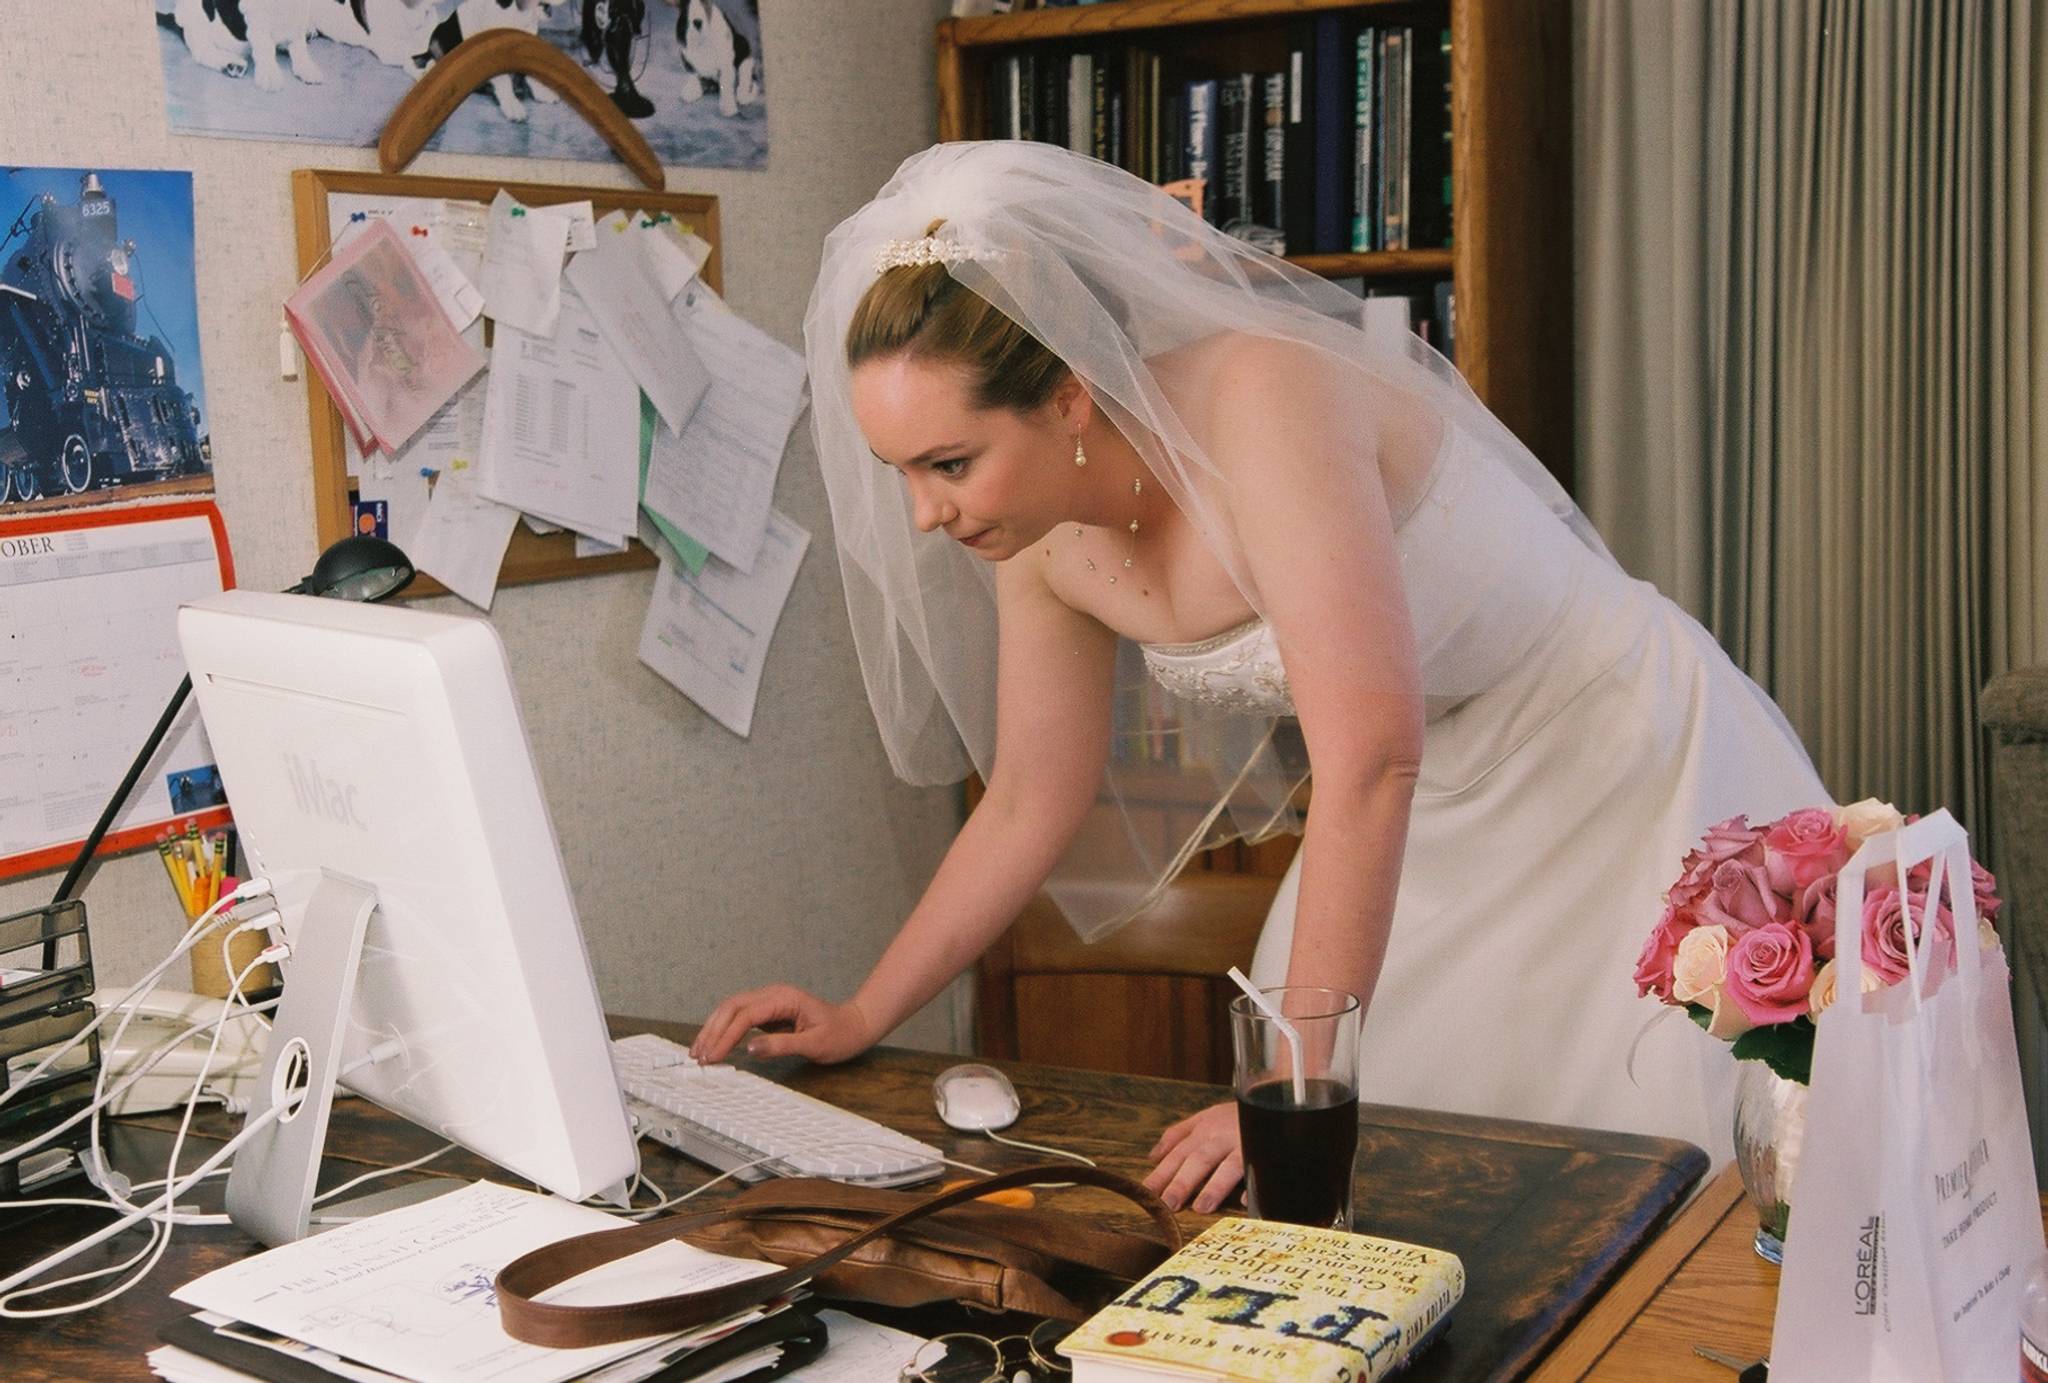 Group shopping online wins big with brides